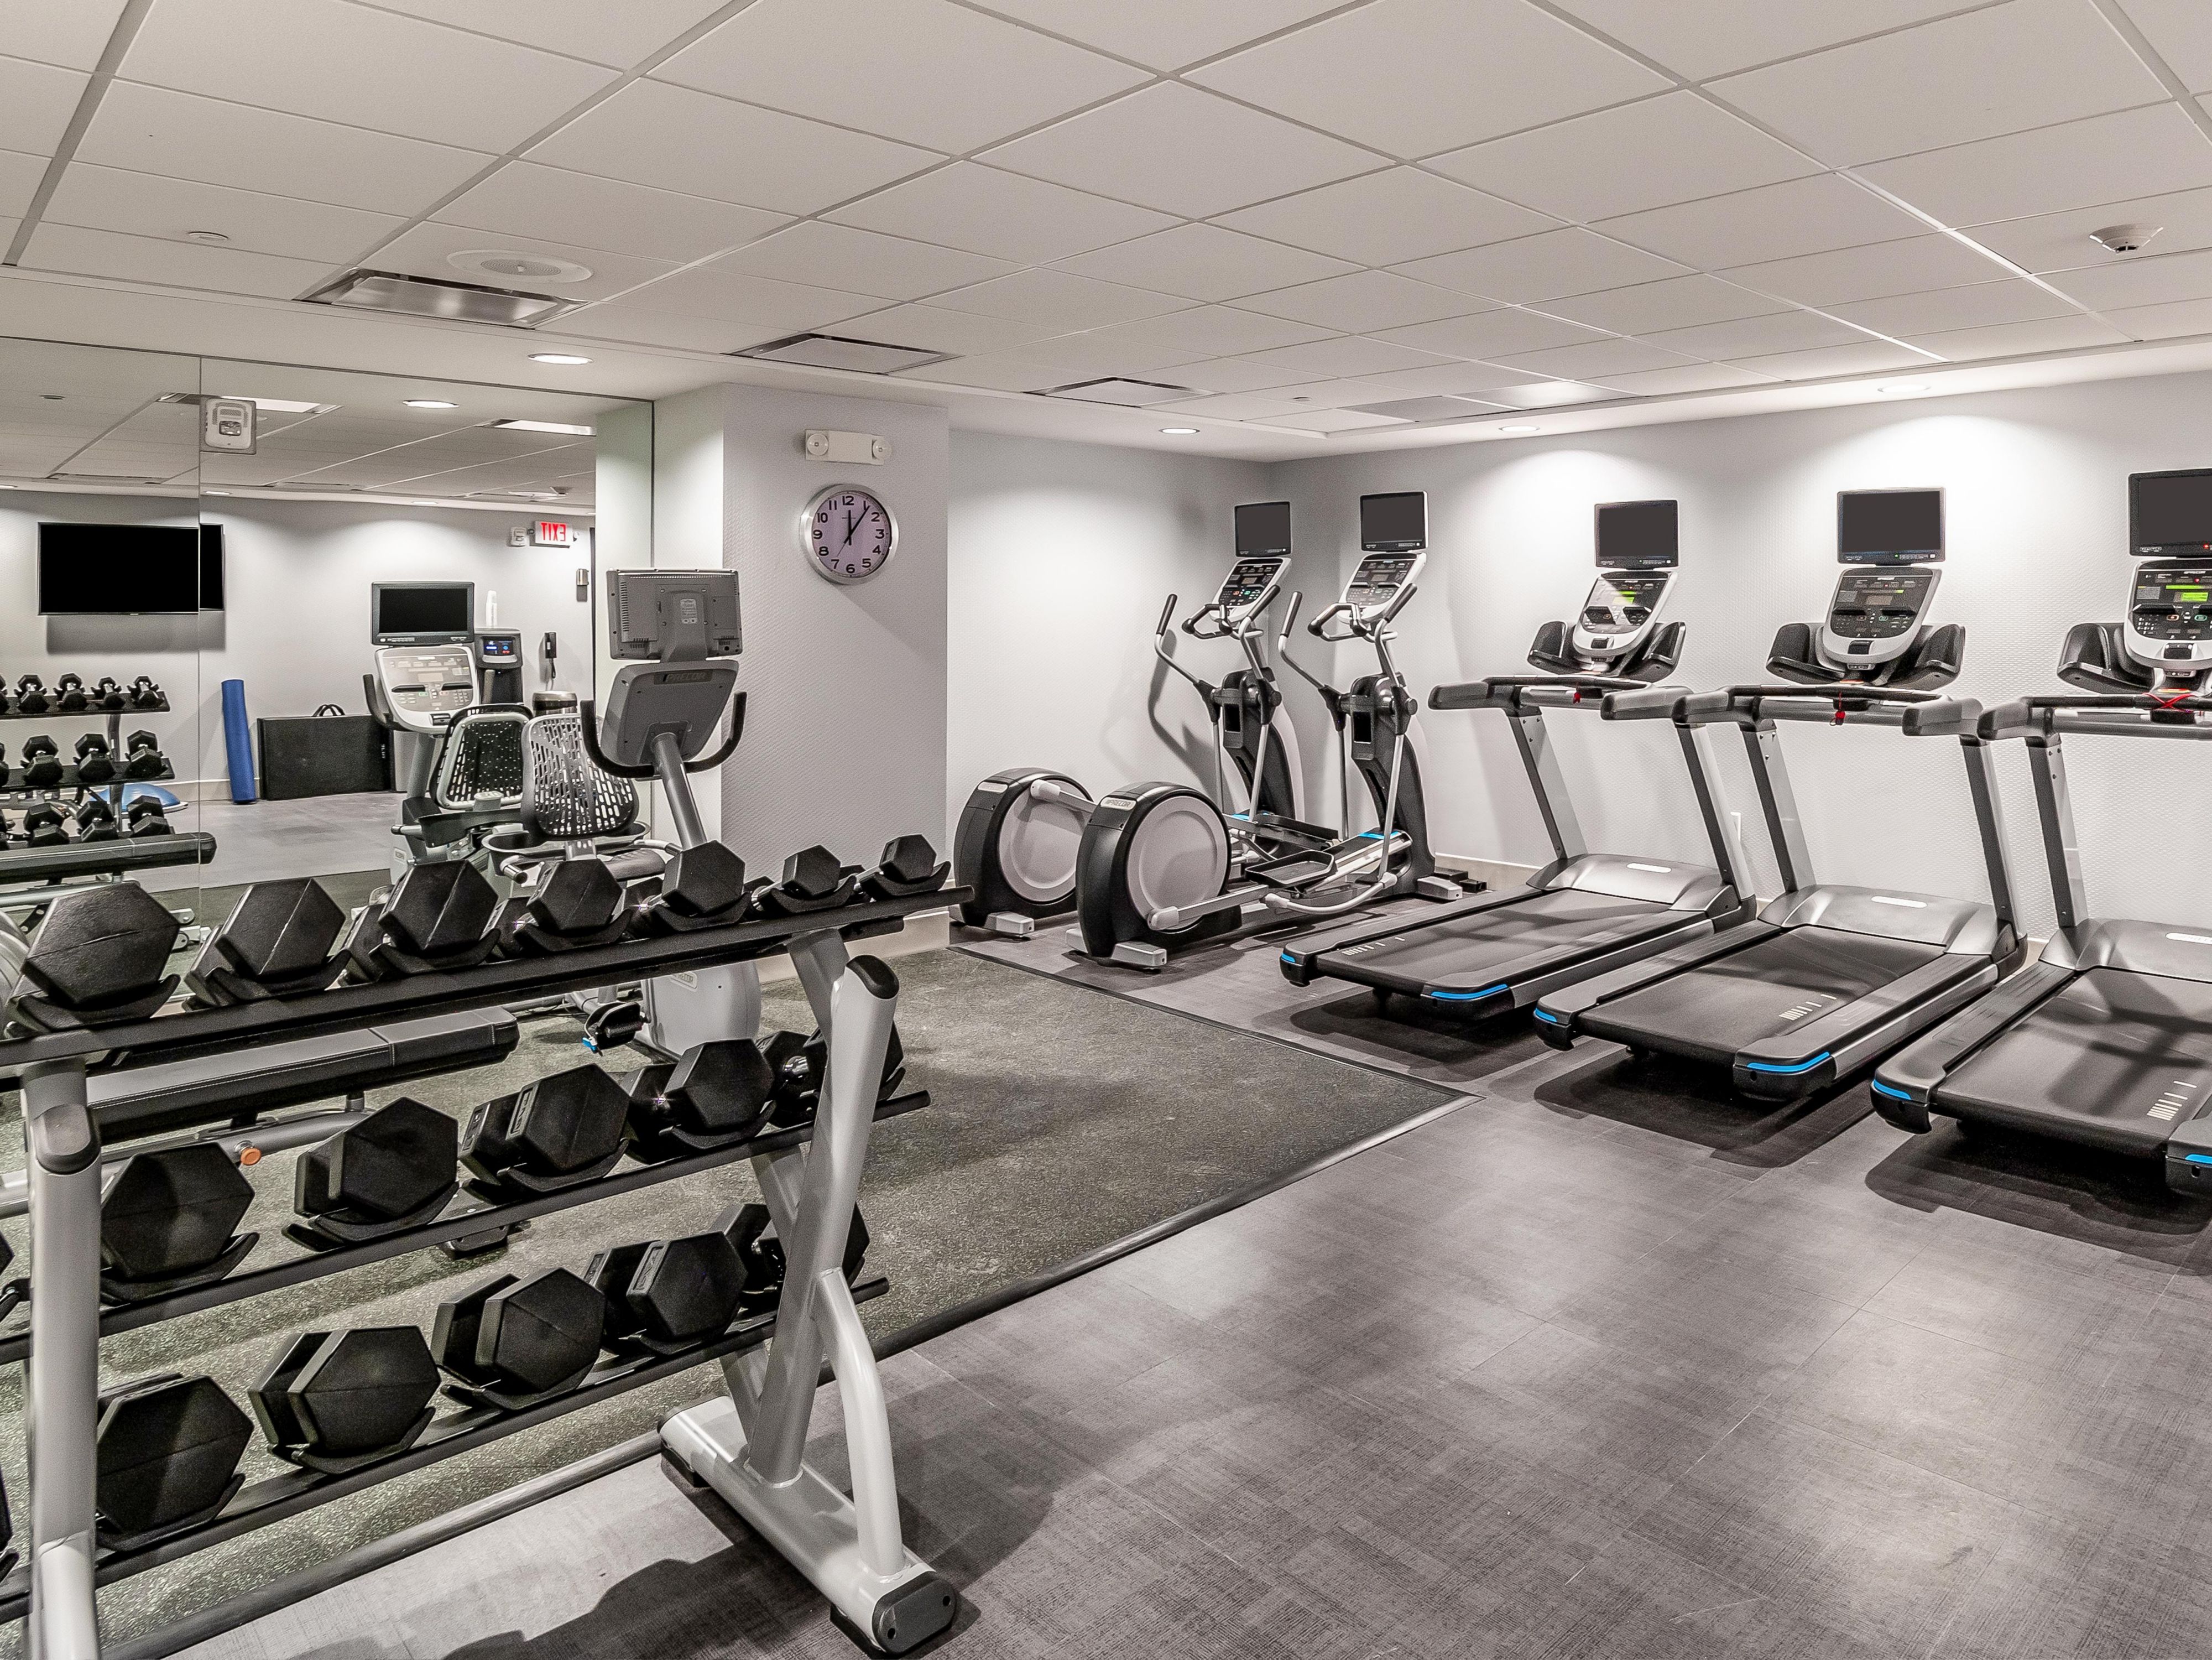 Complimentary 24 Hour Fitness Center with Elliptical, treadmills, and stationary bikes with the most advanced technology available. Ability to upload custom workout and watch any channel desired while working out. Free weights available as well.
